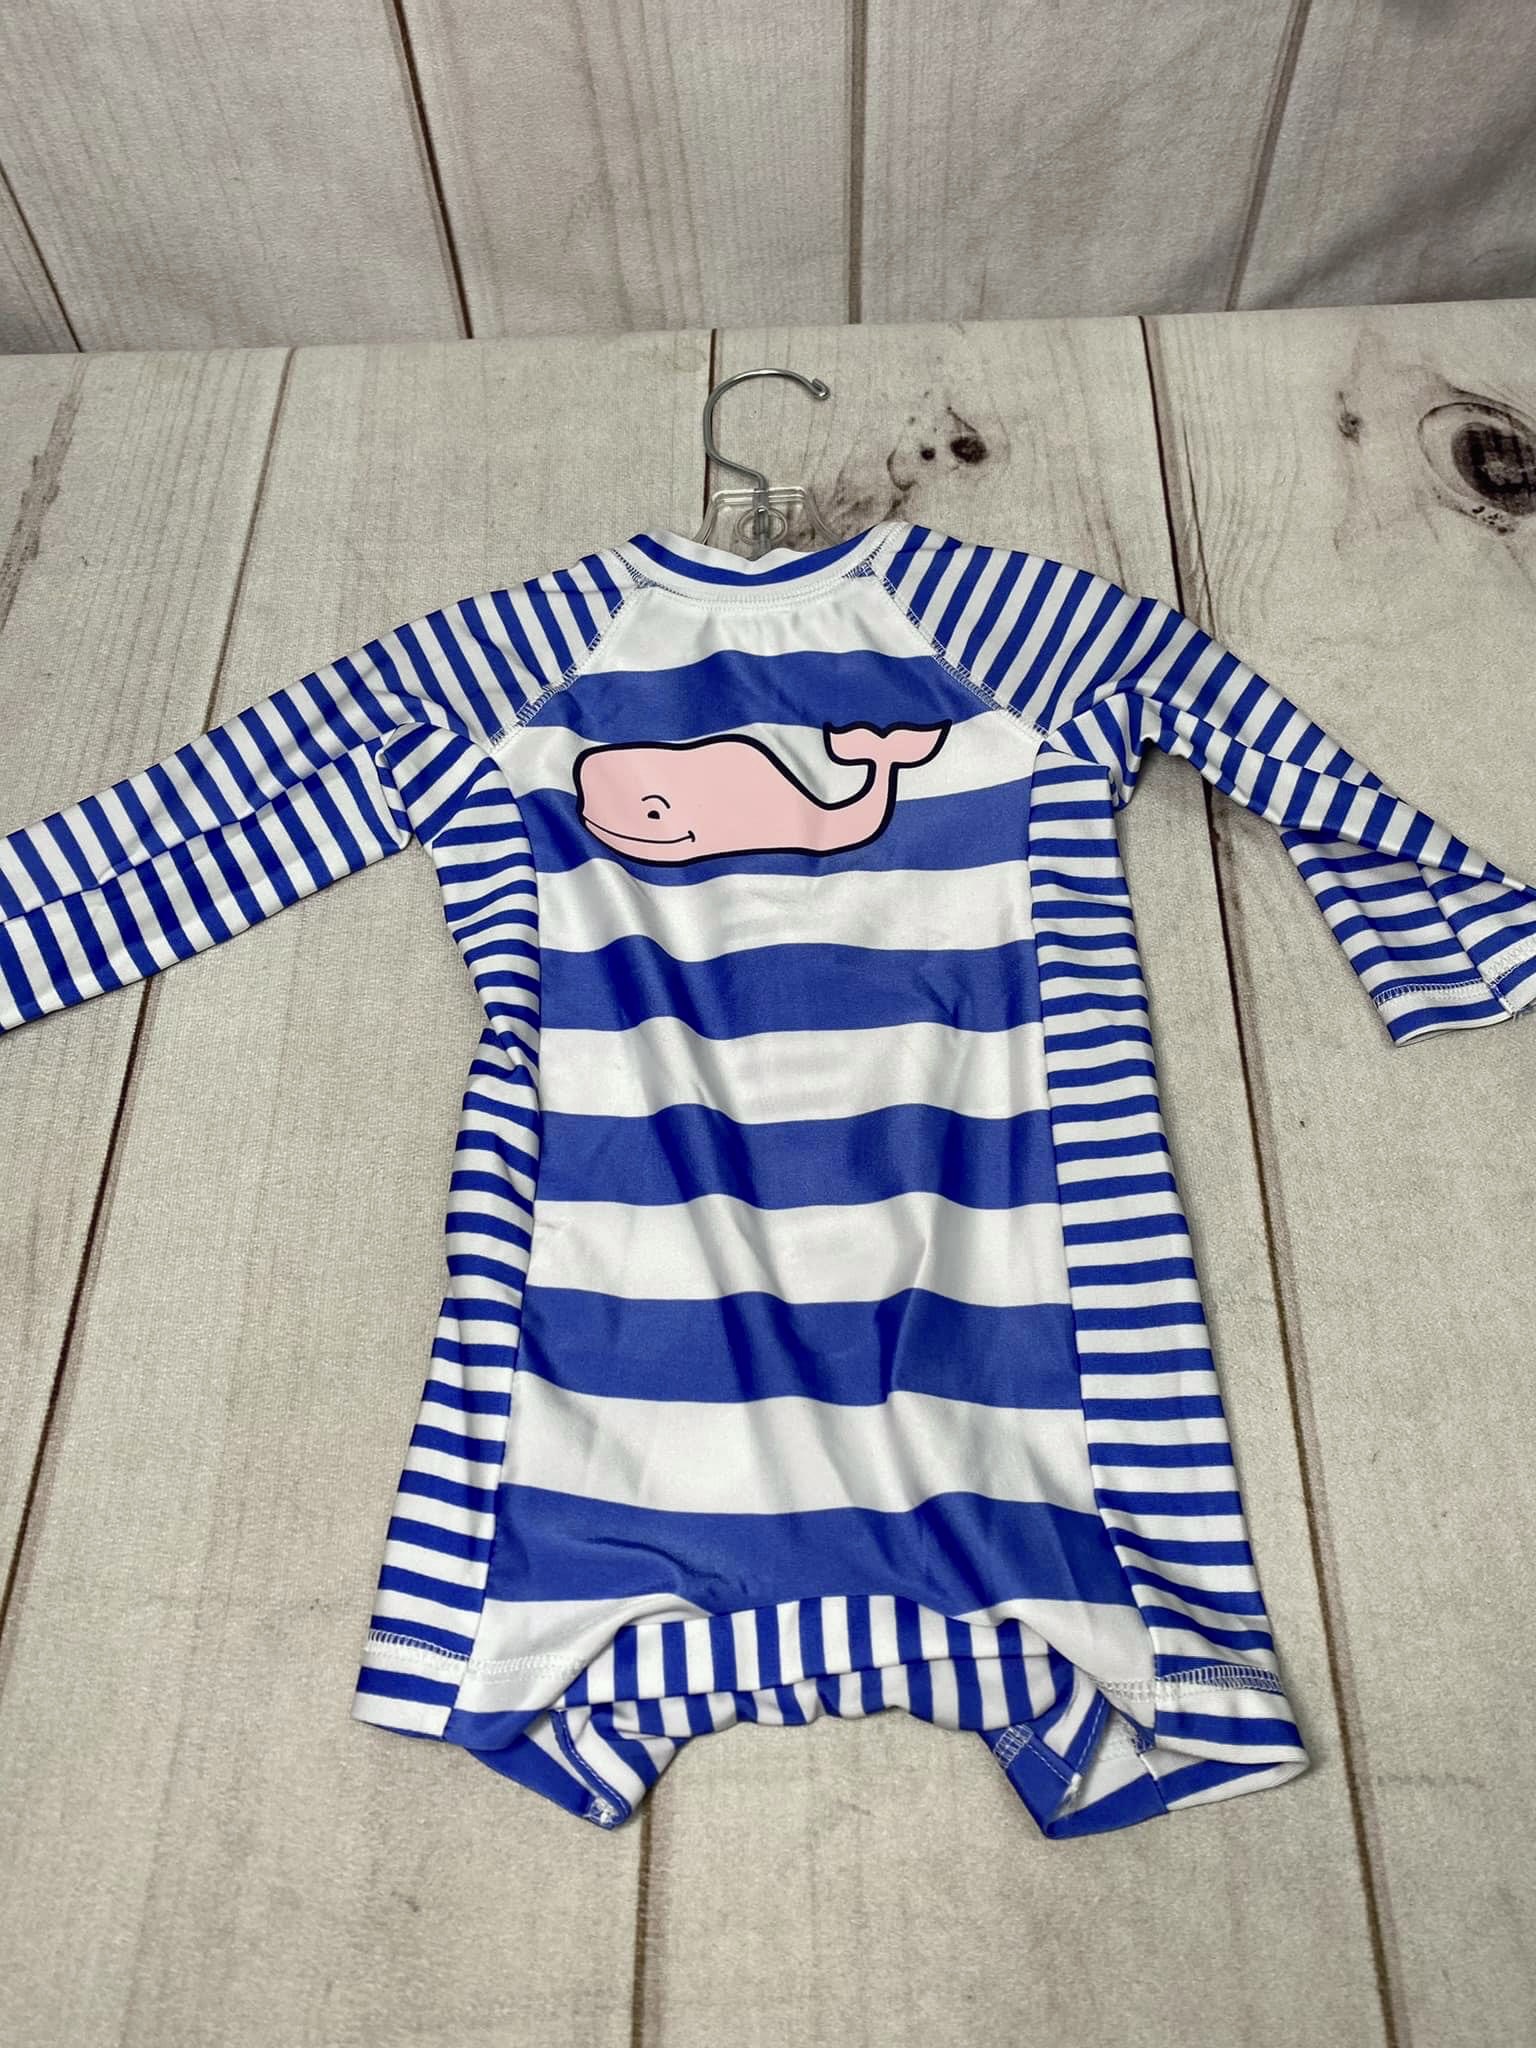 Vineyard Vines Swimsuit - EUC
Blue Stripe with Pink Whale
One Piece - Zip Up Back
Size: Baby Boys 6/9M
83% Recycled Poly, 17% Spandex